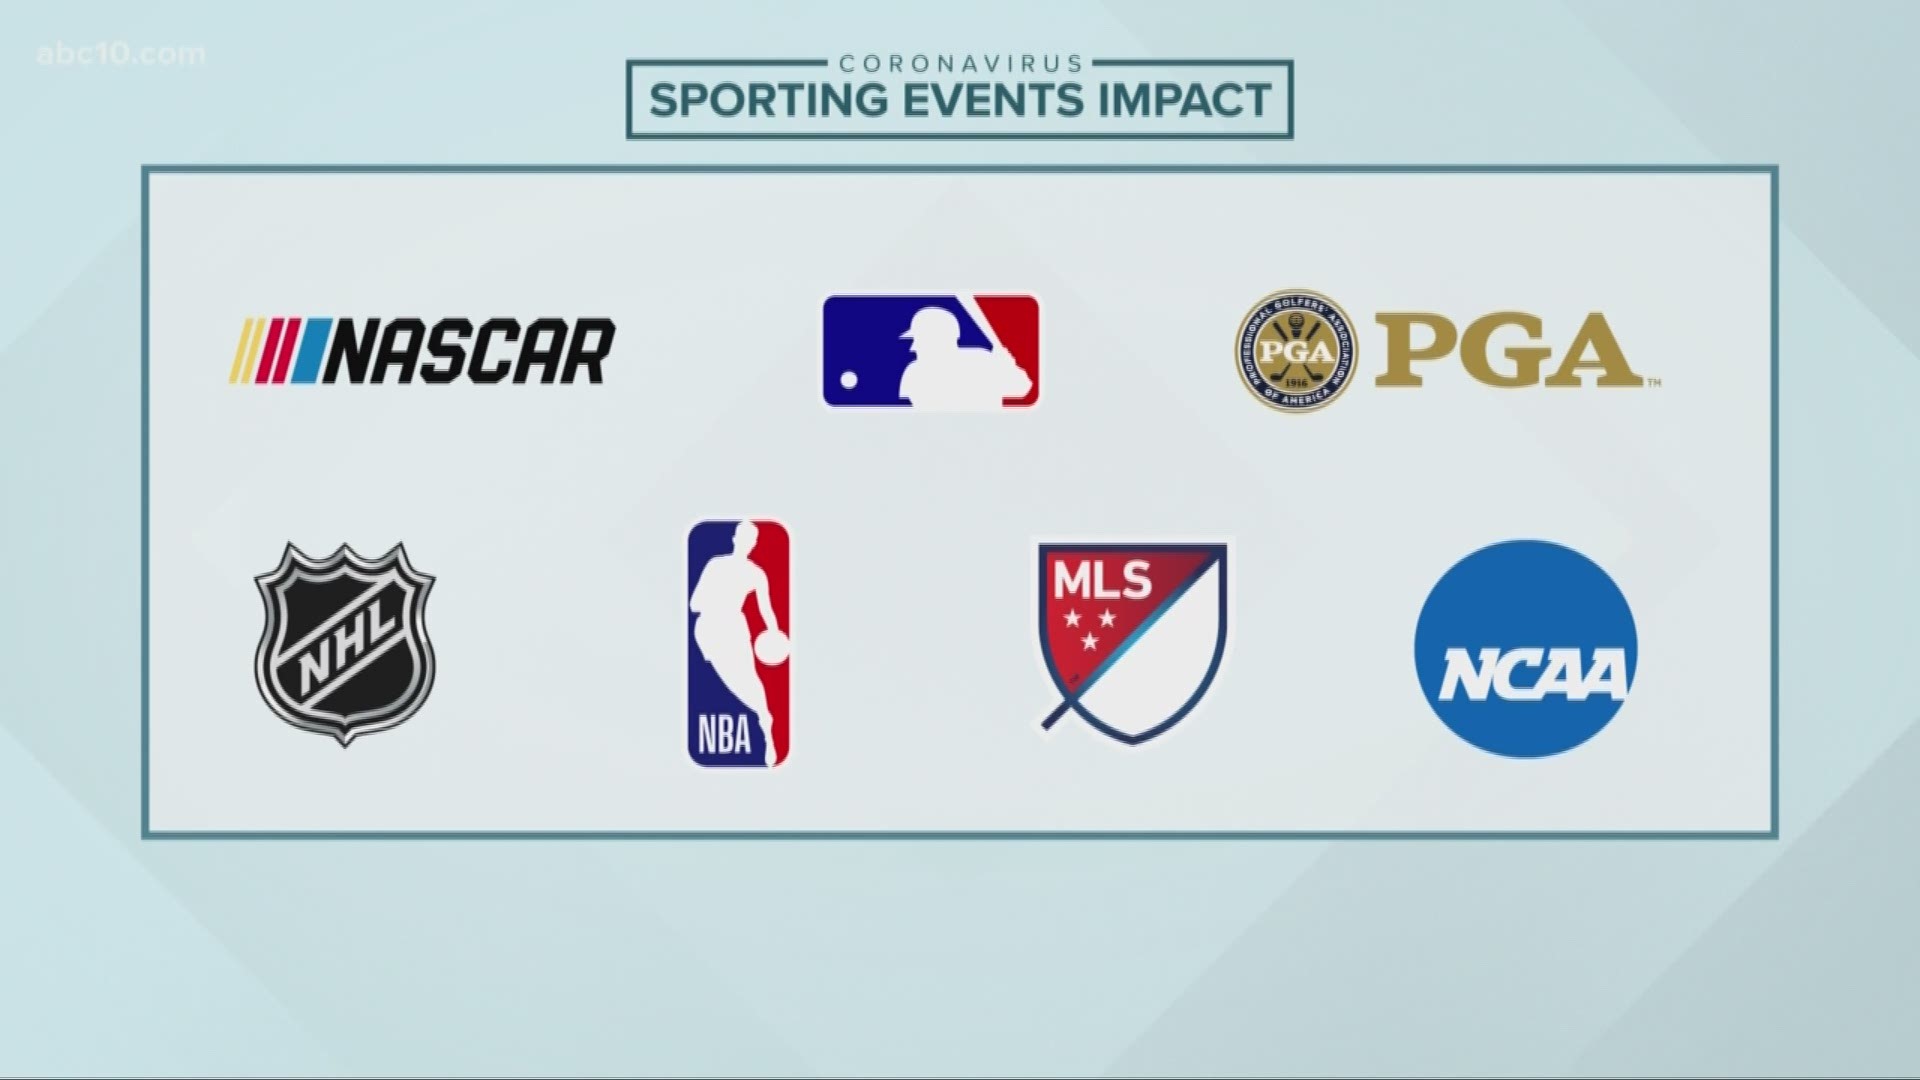 From local high school events to the NBA, sports leagues are cancelling or postponing games and season because of coronavirus concerns.